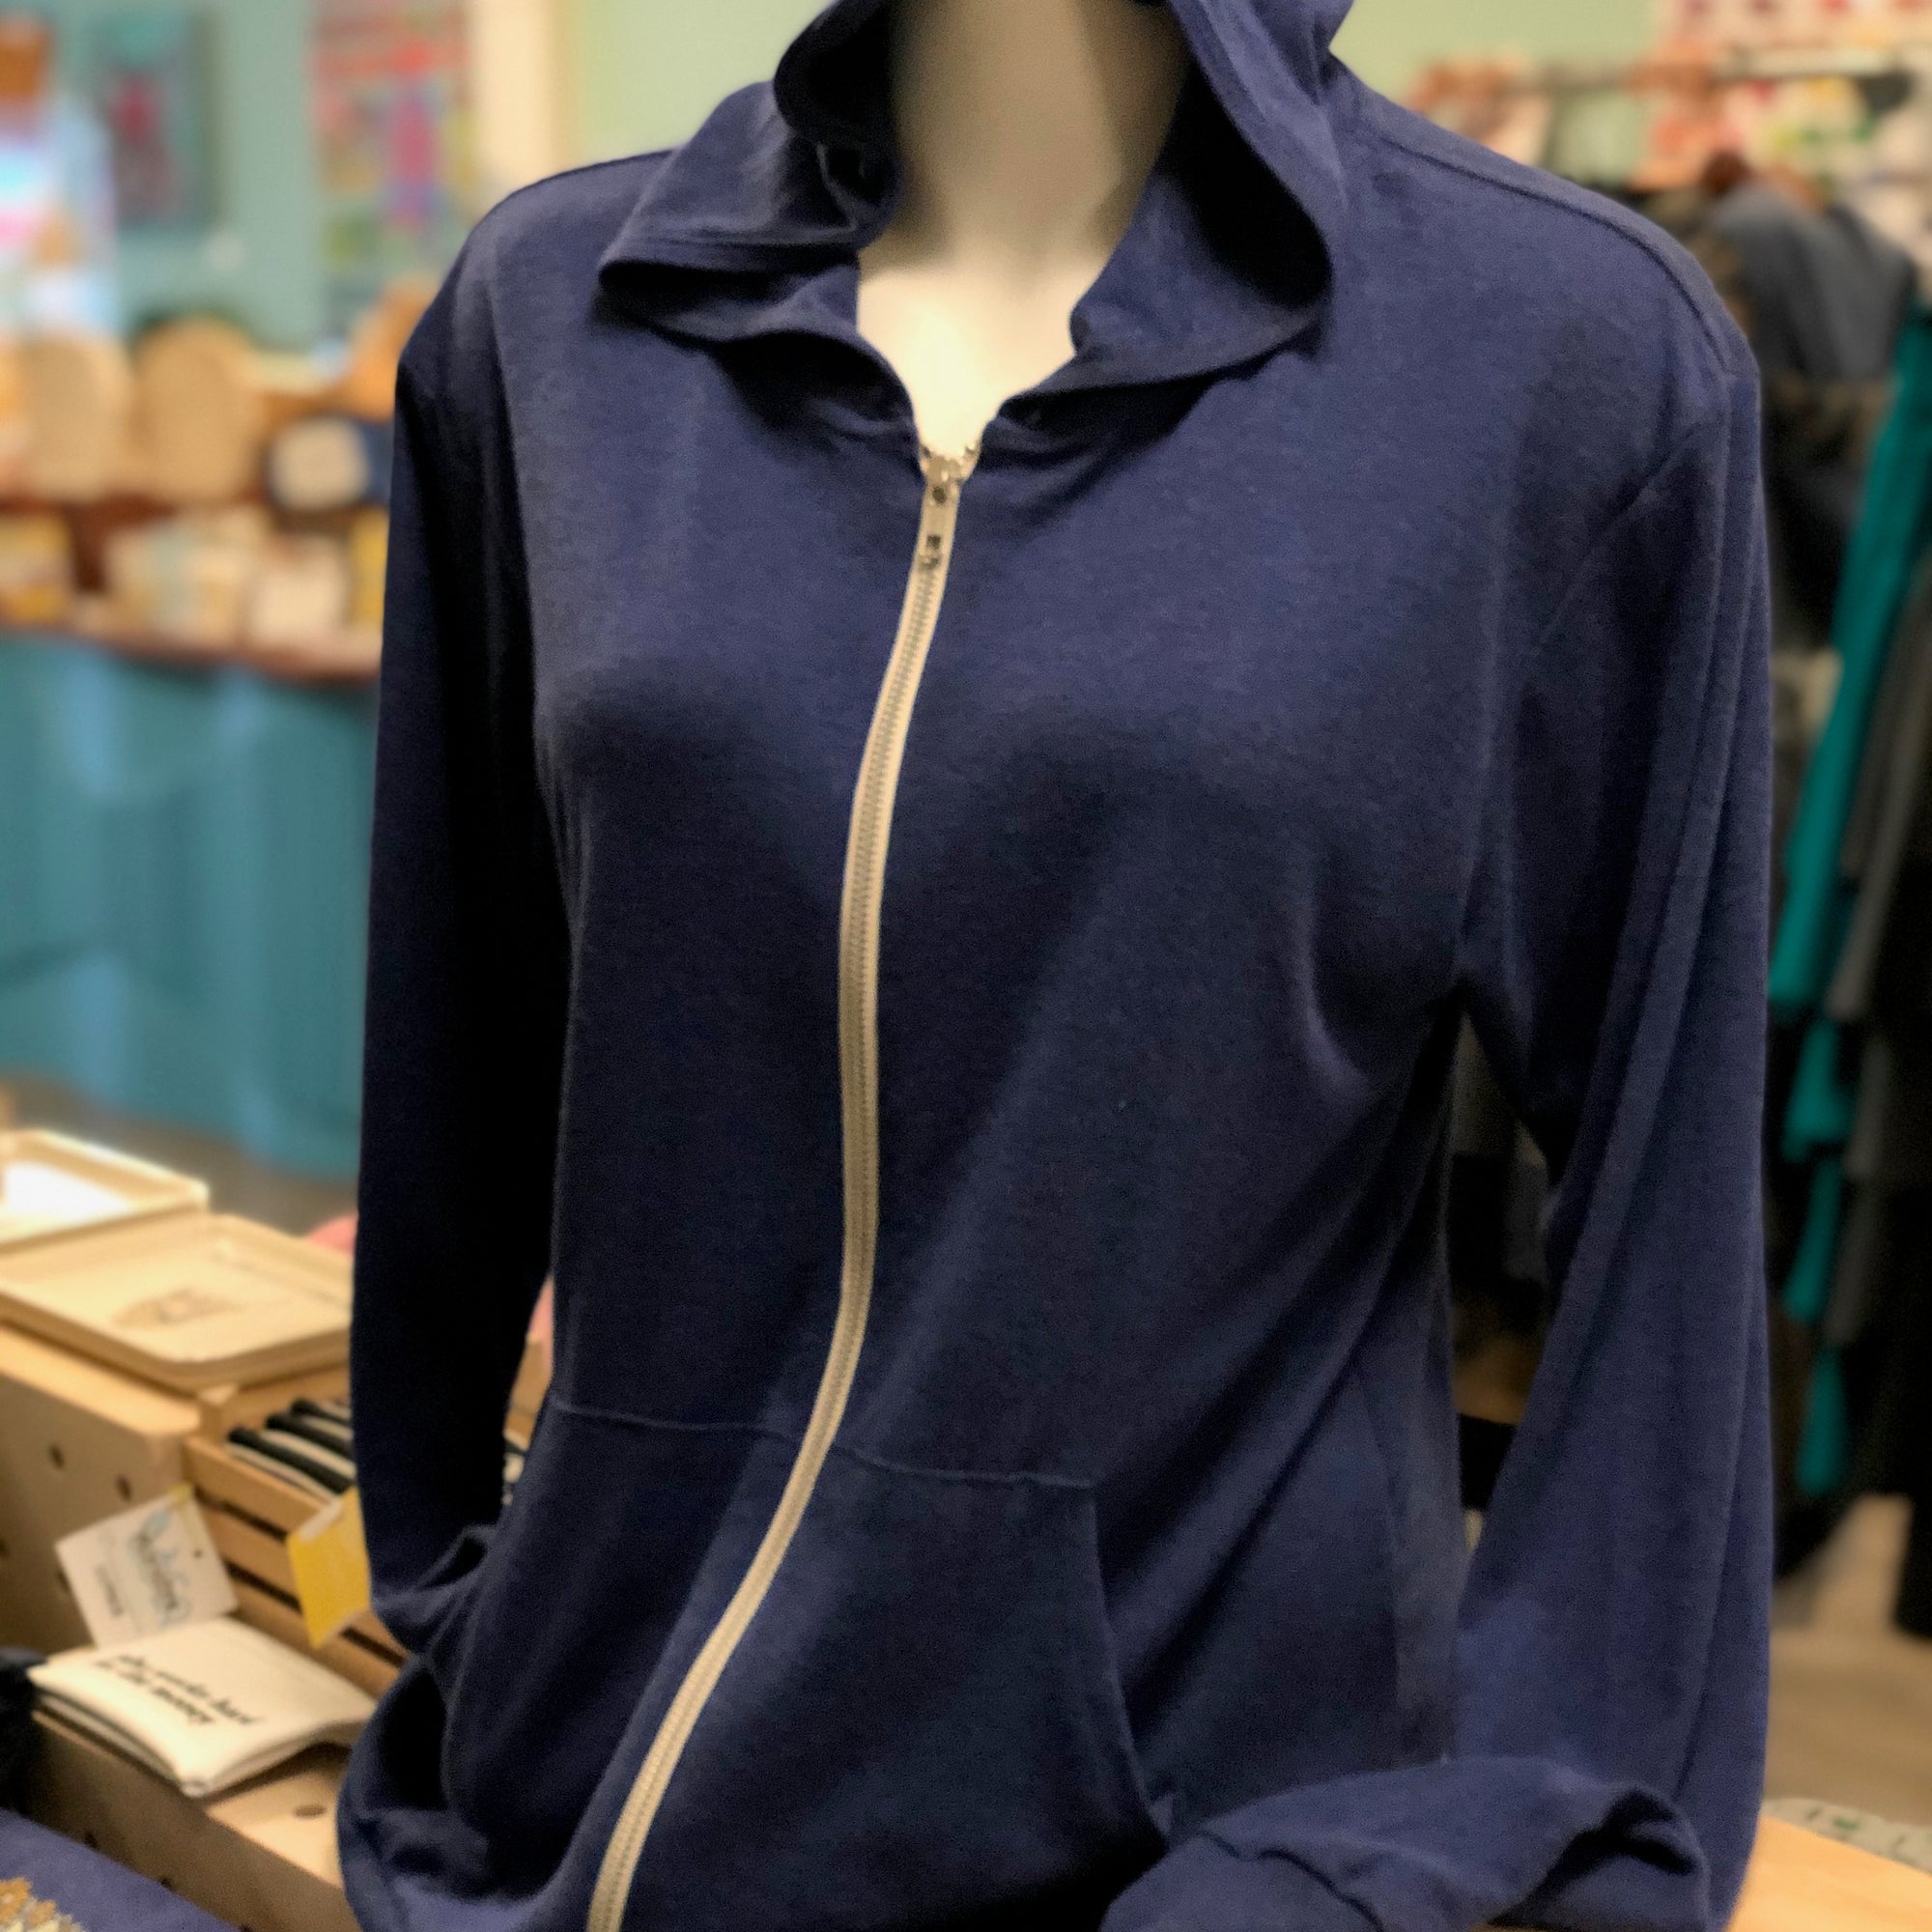 Heathered royal blue triblend unisex hooded sweatshirt. Shown from the zippered front. 